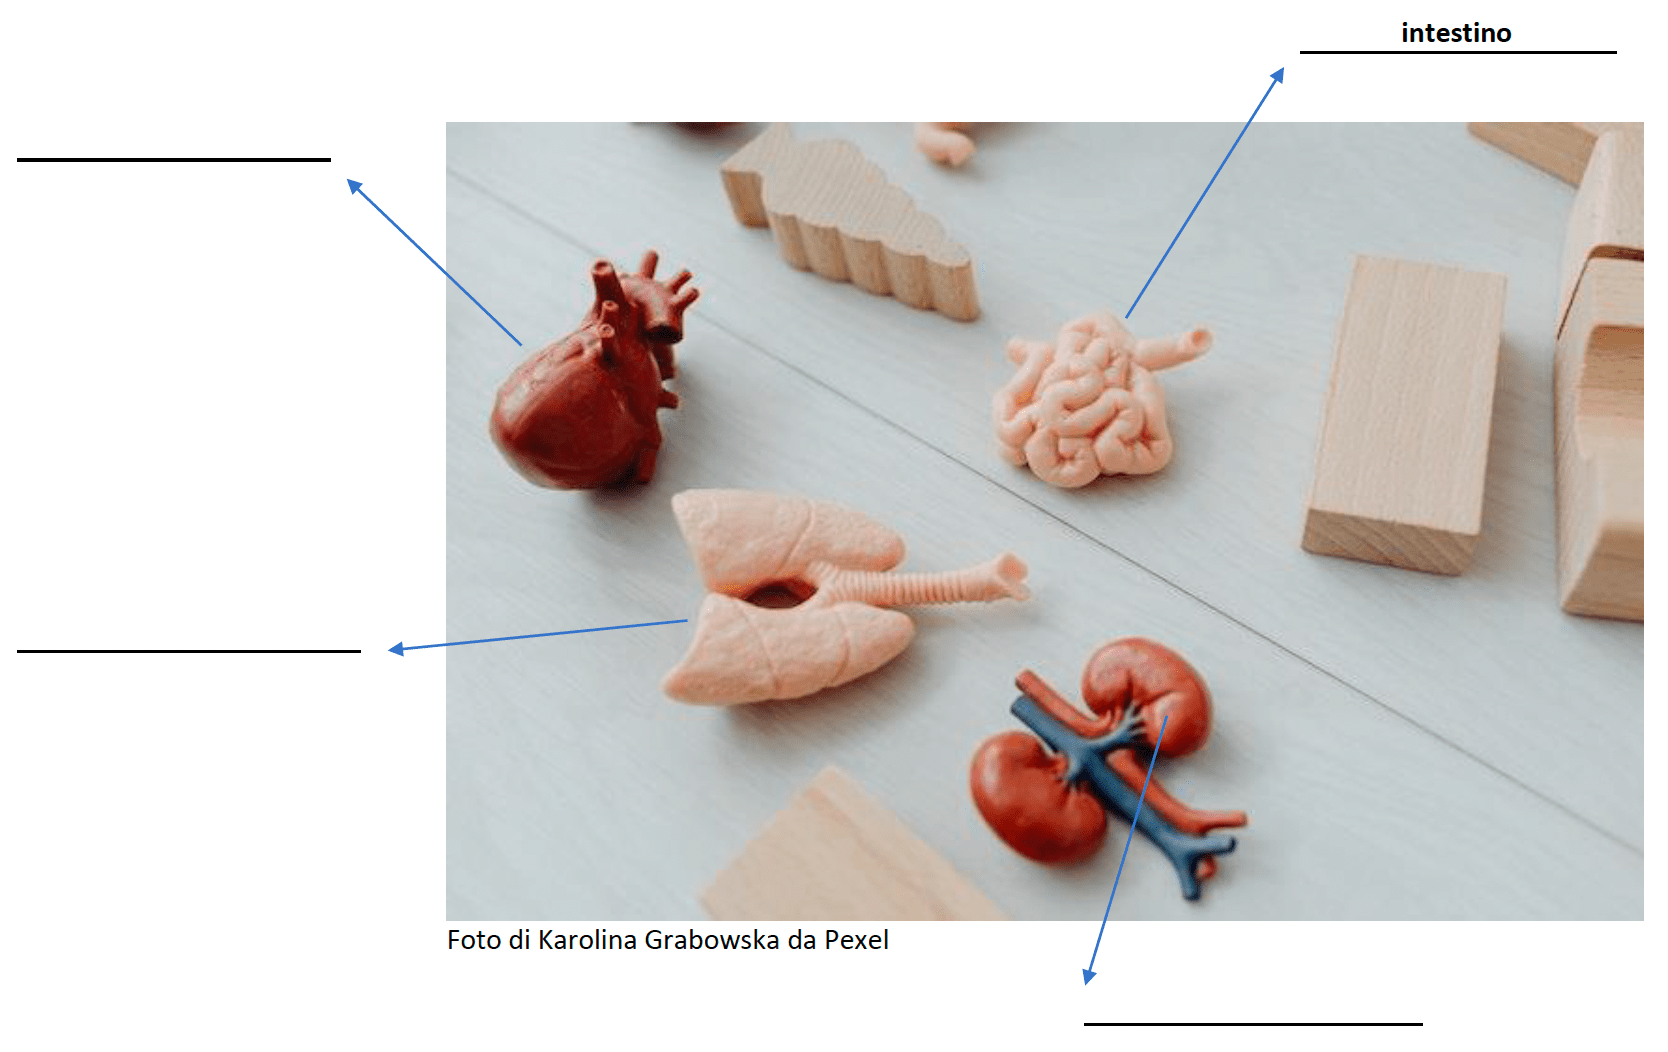 Picture of spleen, heart, lungs and intestine